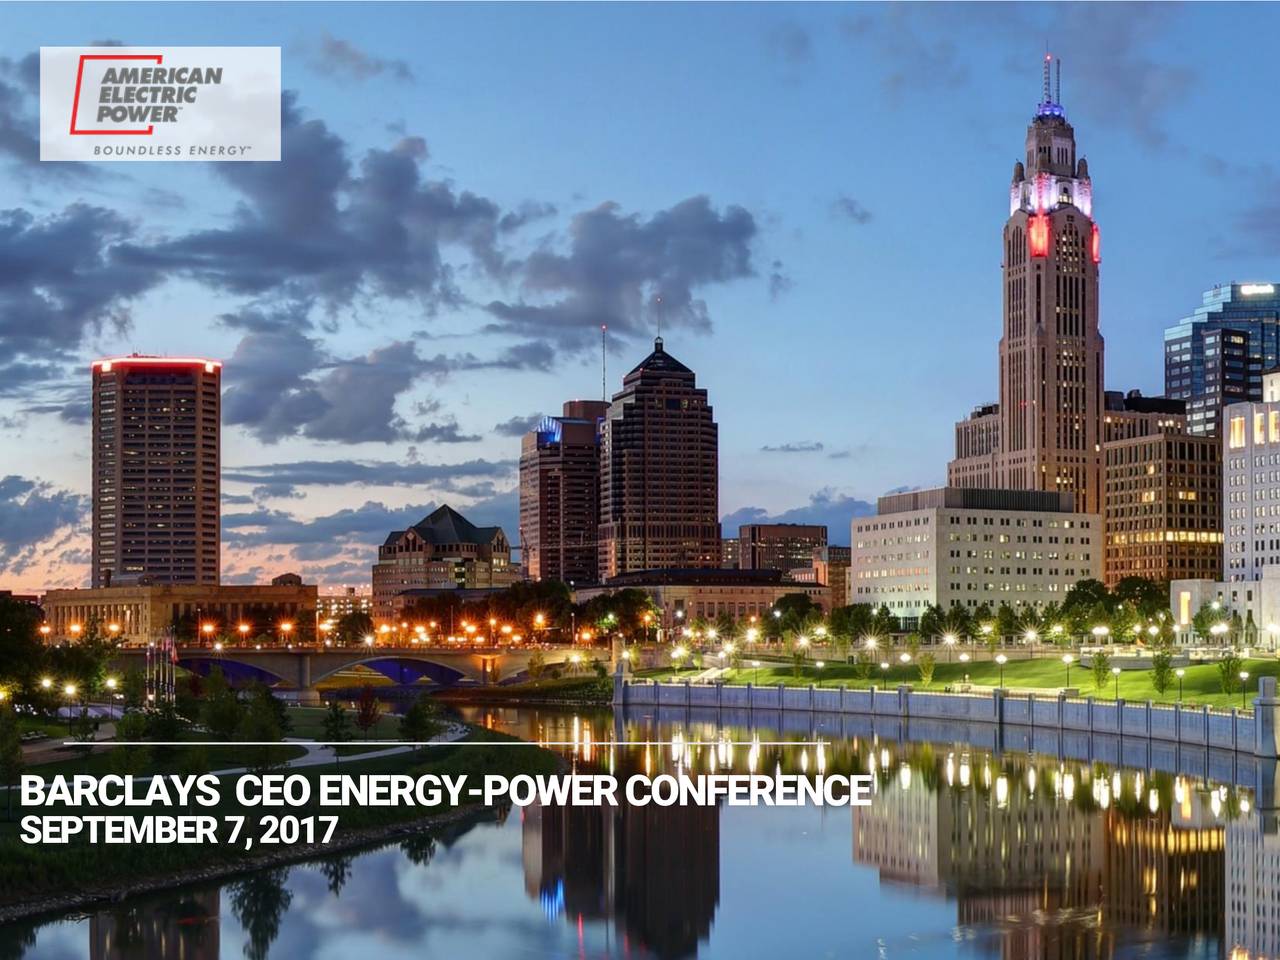 American Electric Power Company (AEP) Presents At Barclays CEO Energy